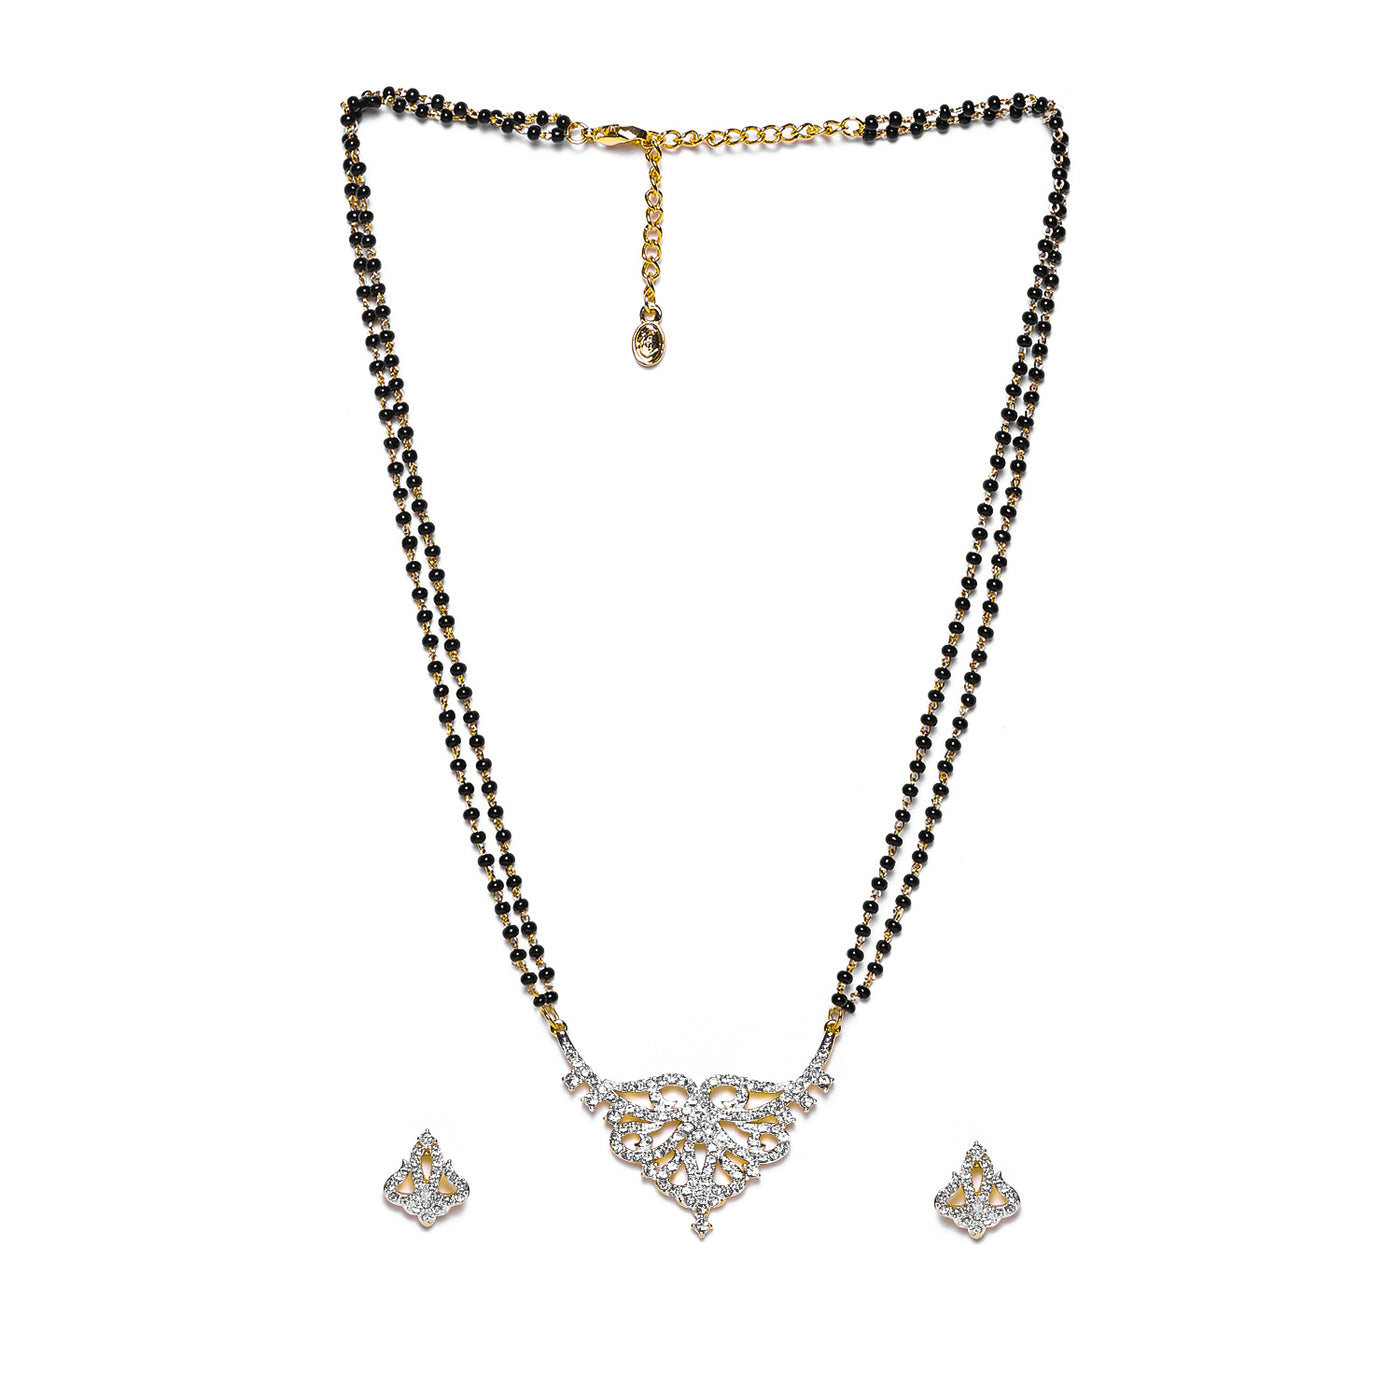 Estele Gold Plated Nestled Mangalsutra Necklace Set with Austrian Crystals for Women